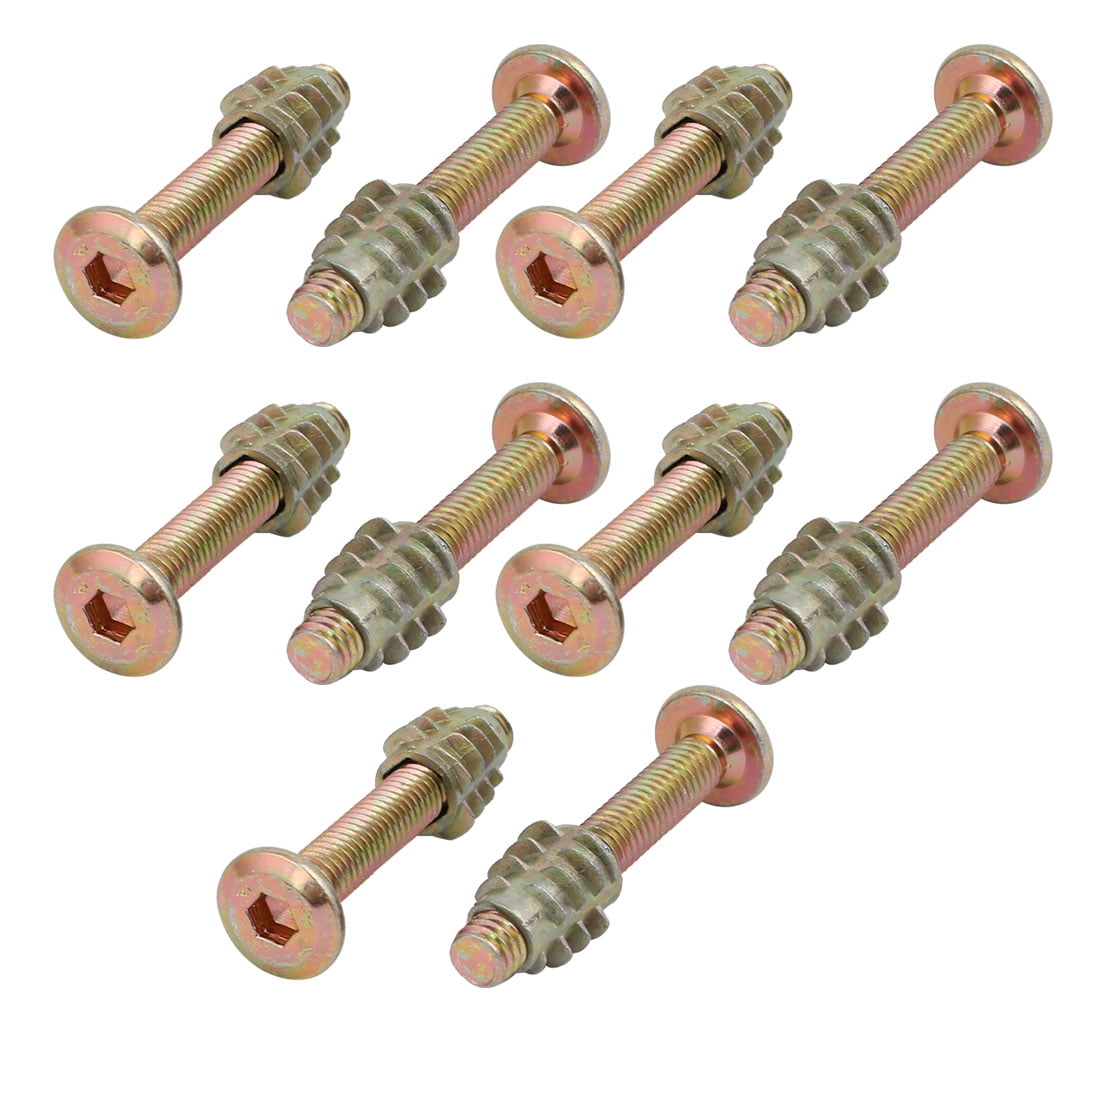 10pcs Wooded Furniture Connecting Fitting M6x20mm phillips Bolt w Insert Nut 